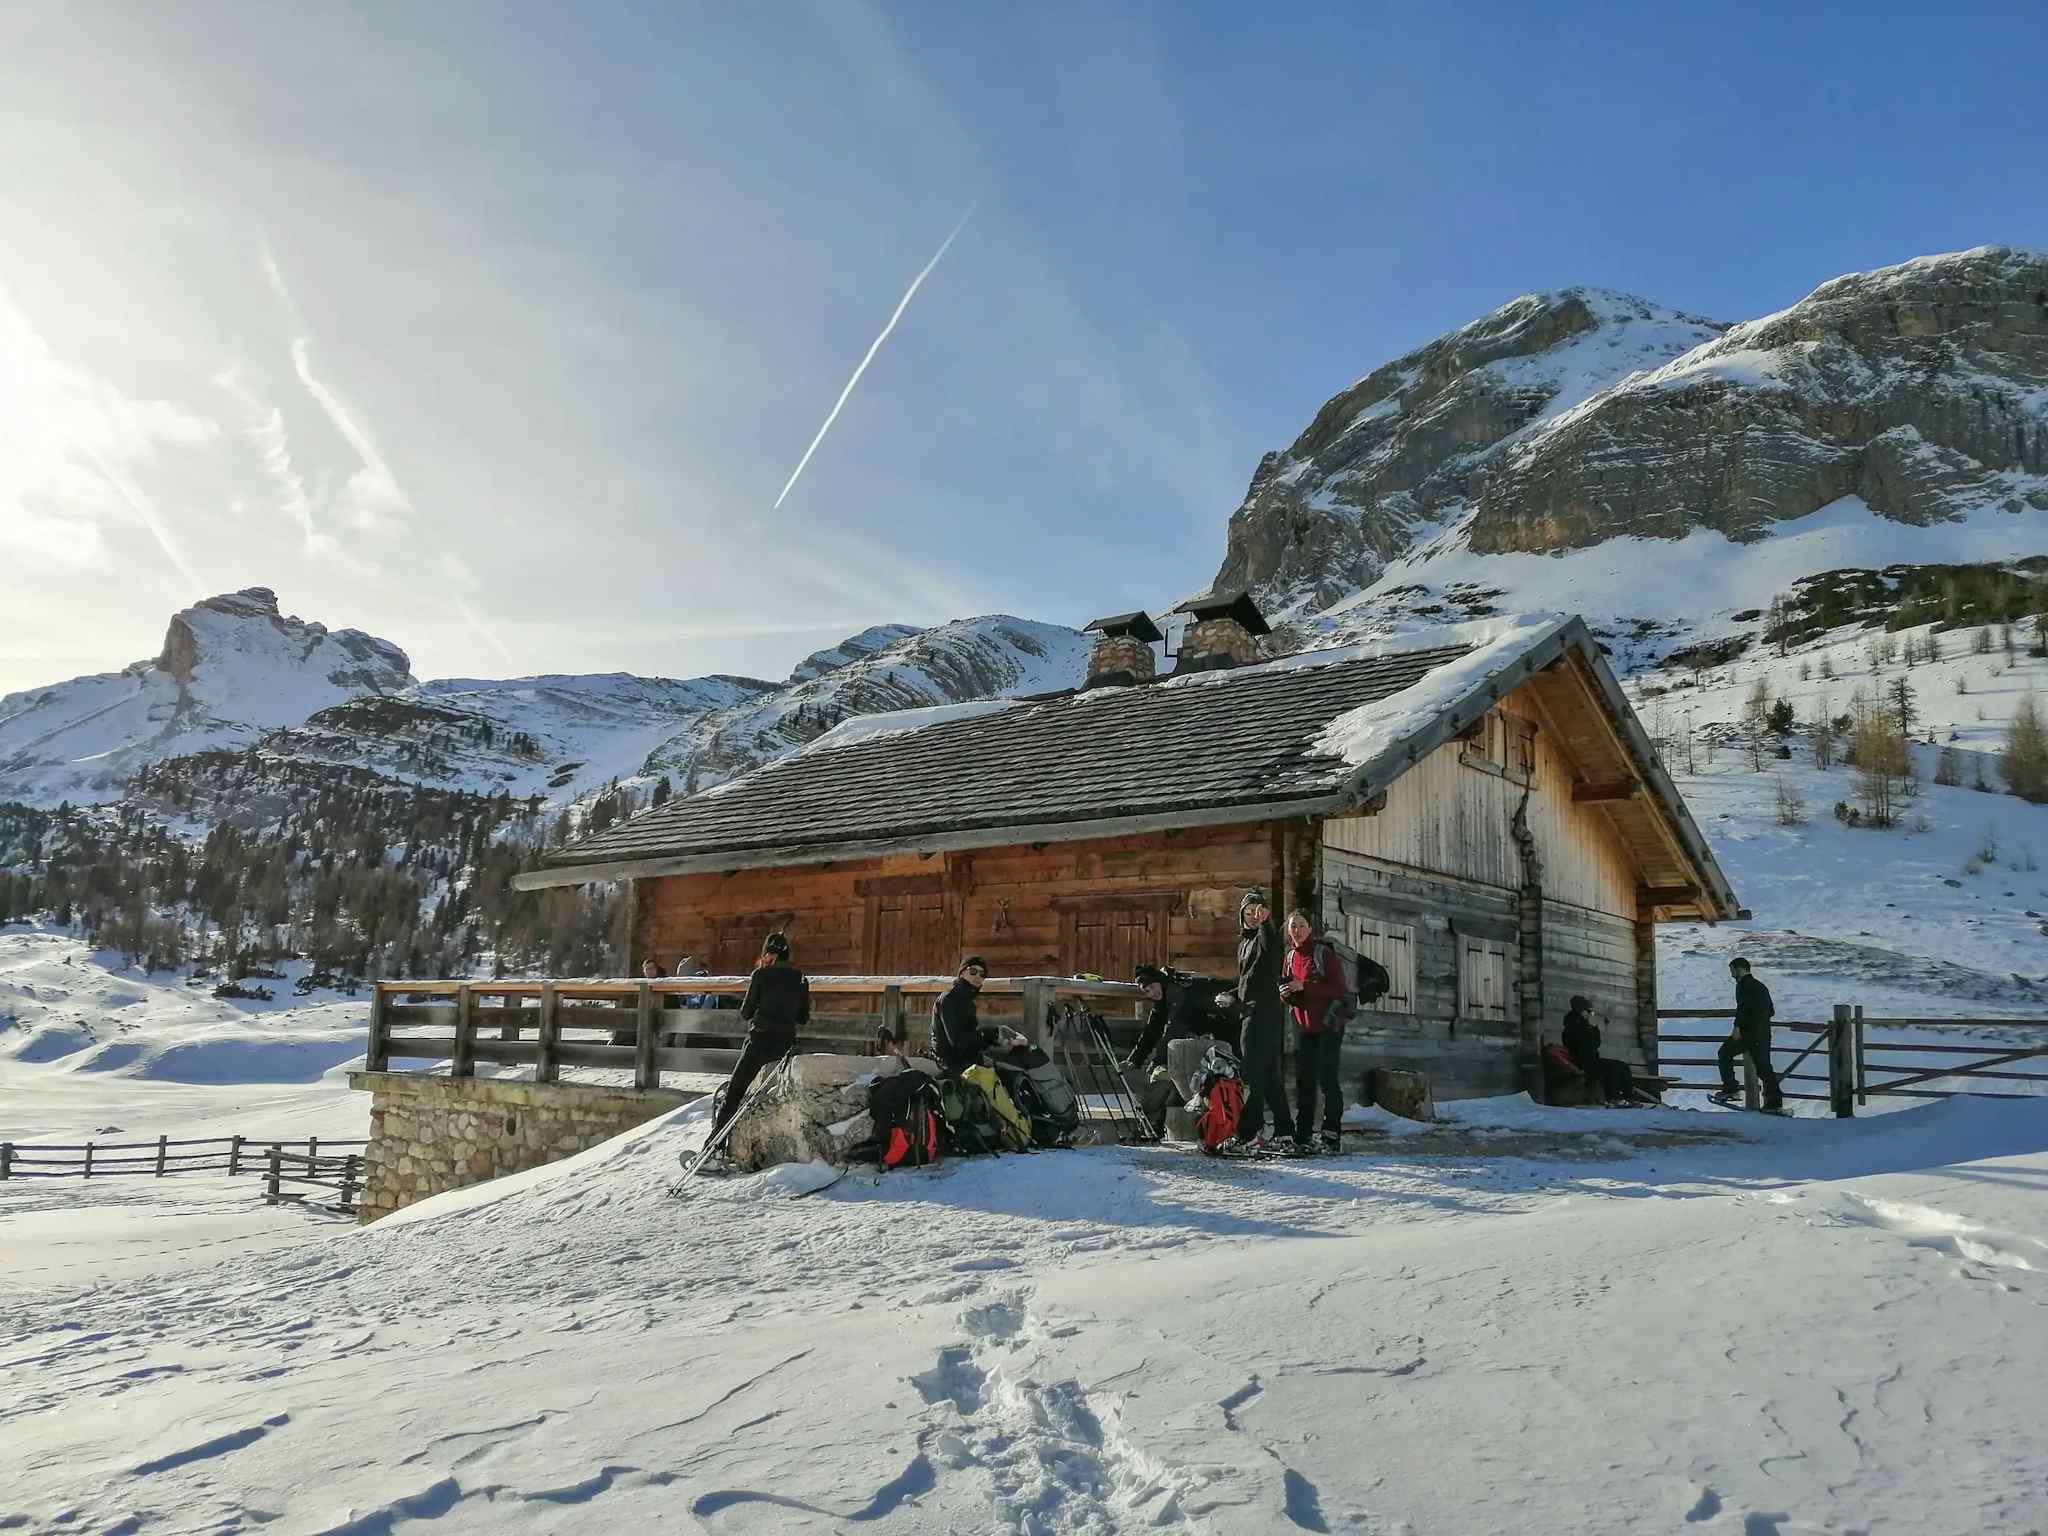 Hikers in the snow outside a mountain hut in the Dolomites, Italy.